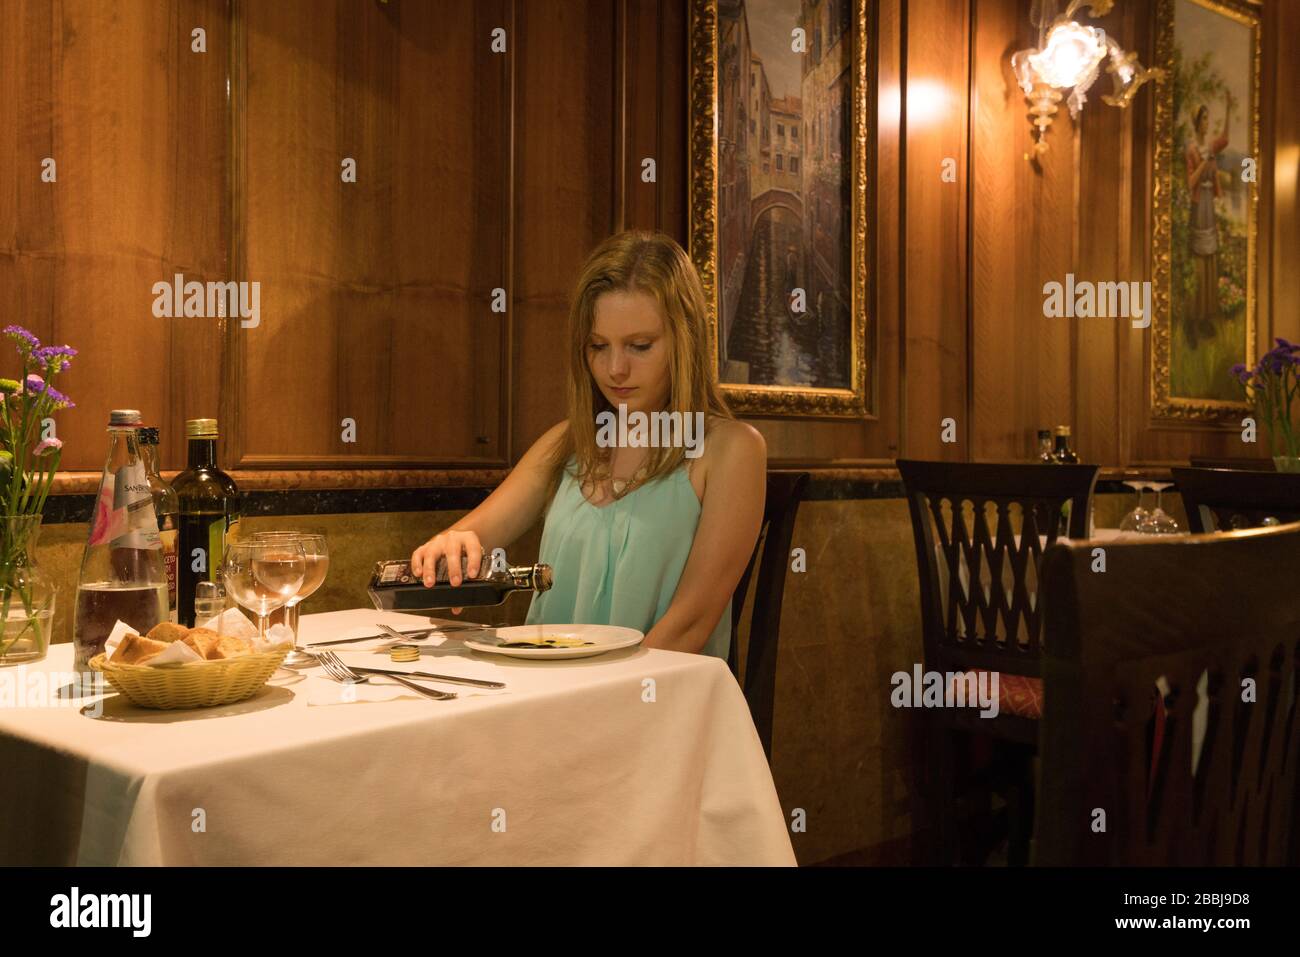 Female pours vinegar on a plate in a restaurant with wood paneling and linen tableclothes near the Rialto Bridge, Venice, Italy Stock Photo